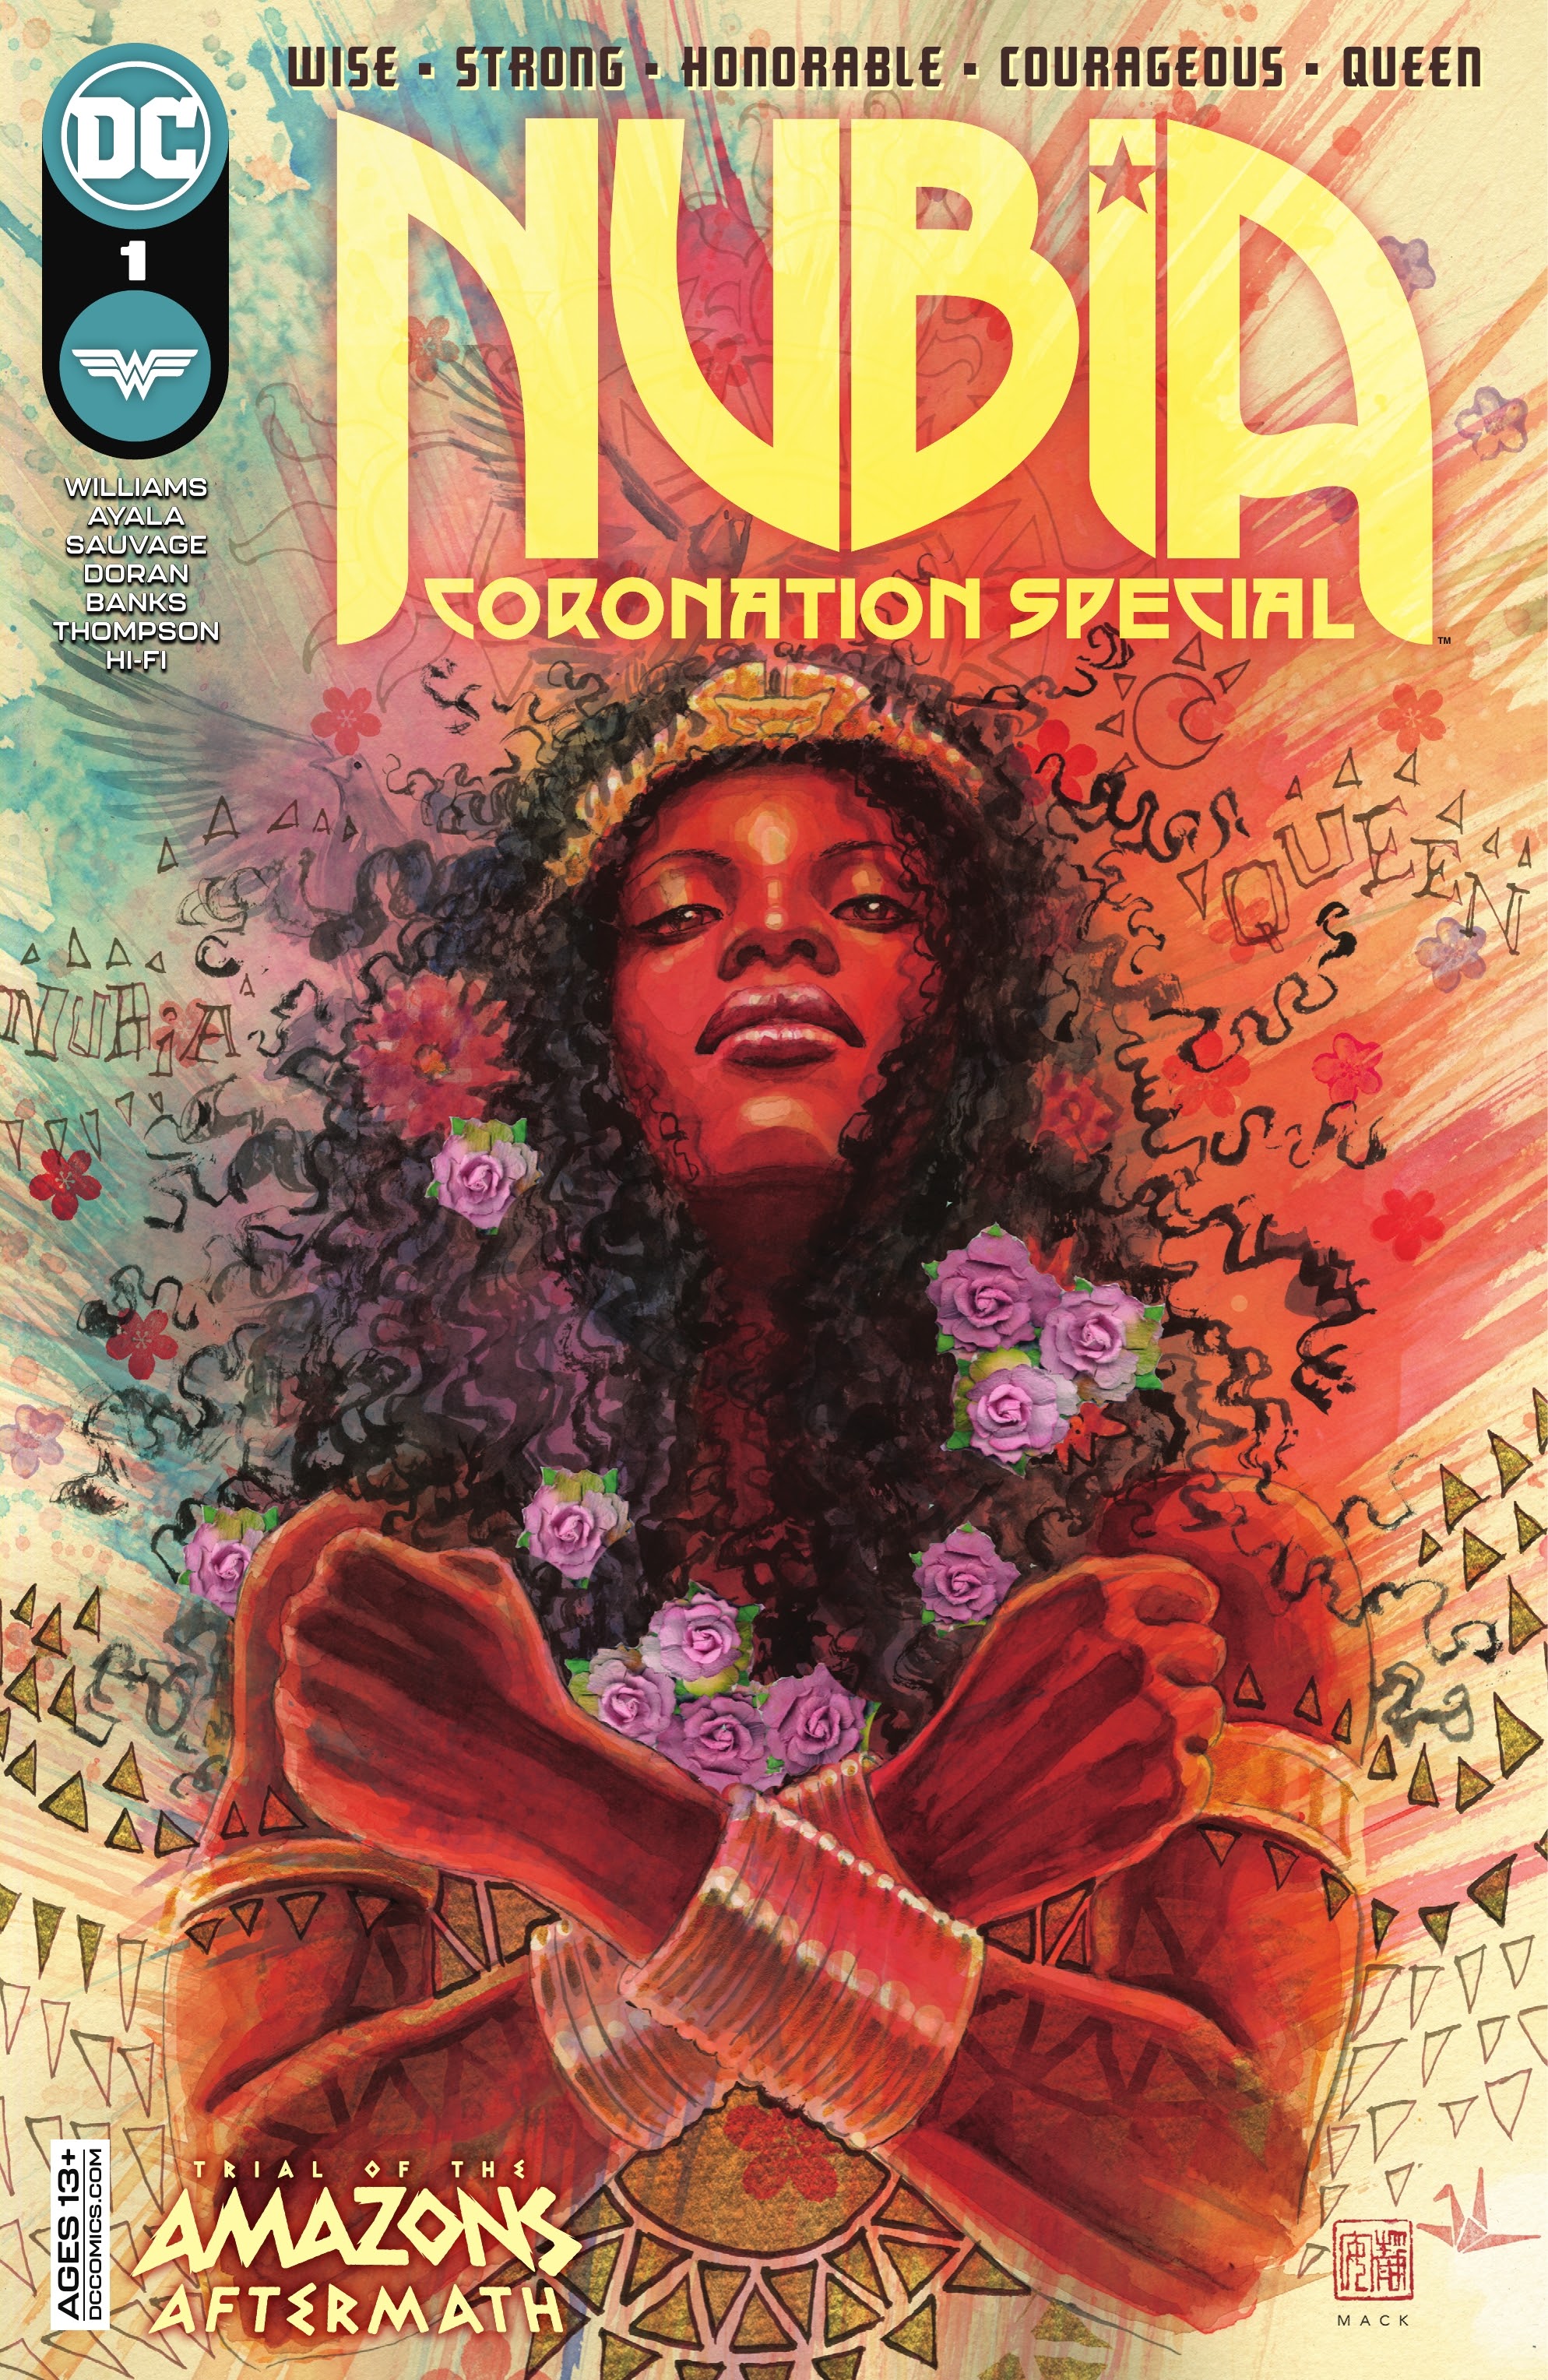 Read online Nubia: Coronation Special comic -  Issue # Full - 1